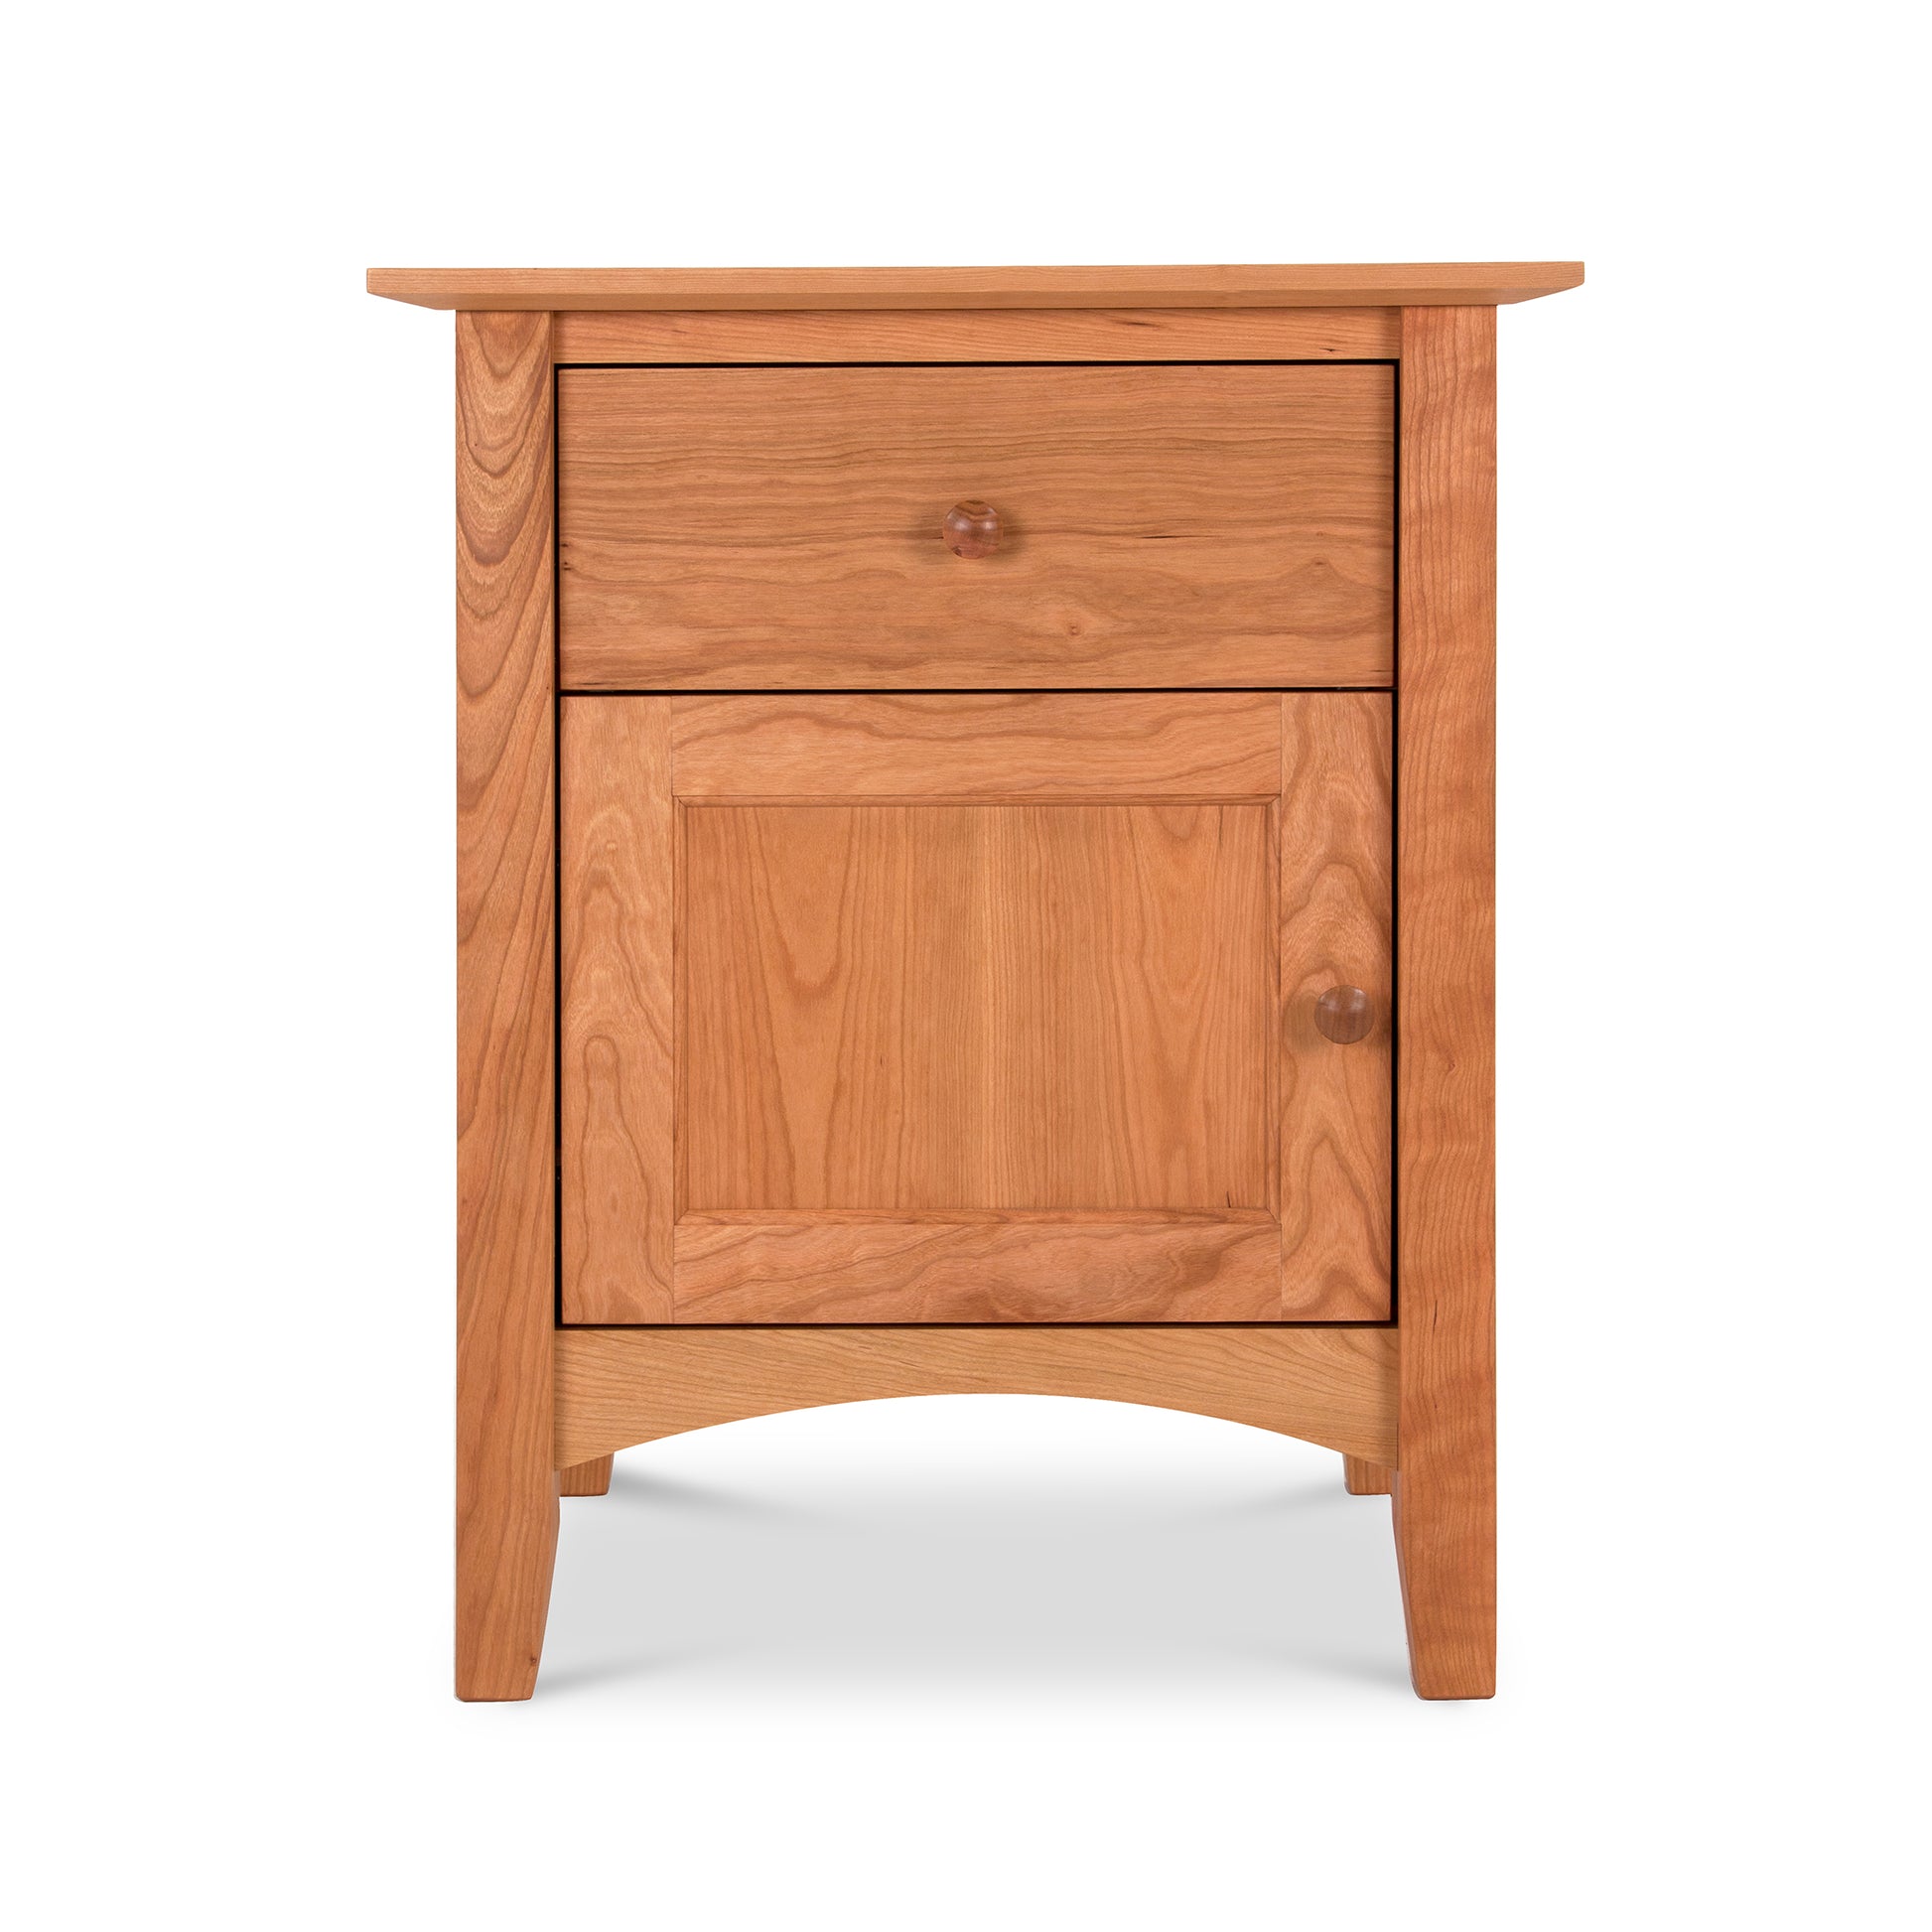 The Maple Corner Woodworks American Shaker 1-Drawer Nightstand with Door is a finely crafted piece of Vermont craftsmanship. Made from natural cherry wood, this small nightstand features a single drawer for convenient storage.